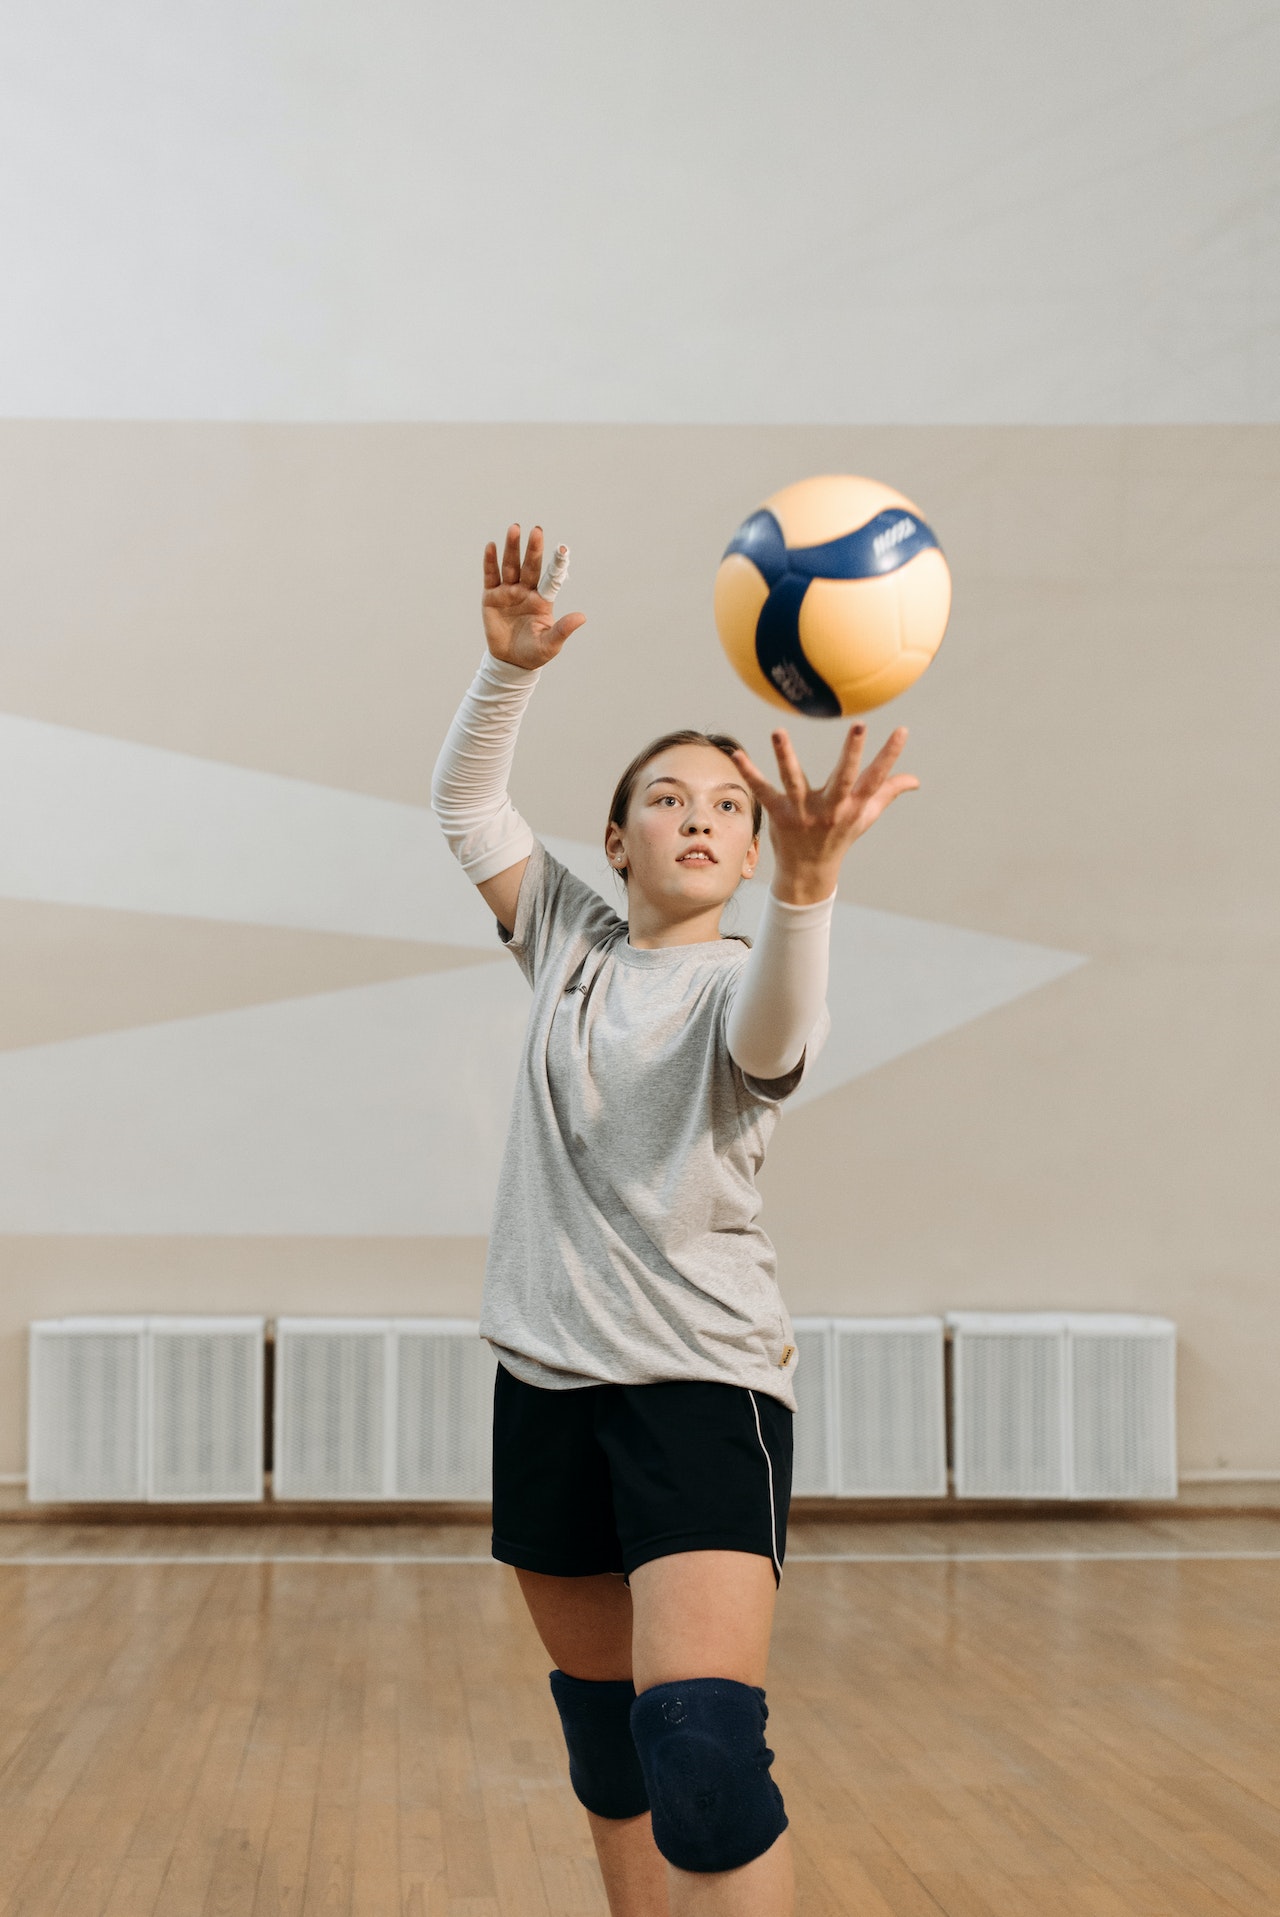 young girl serving volleyball